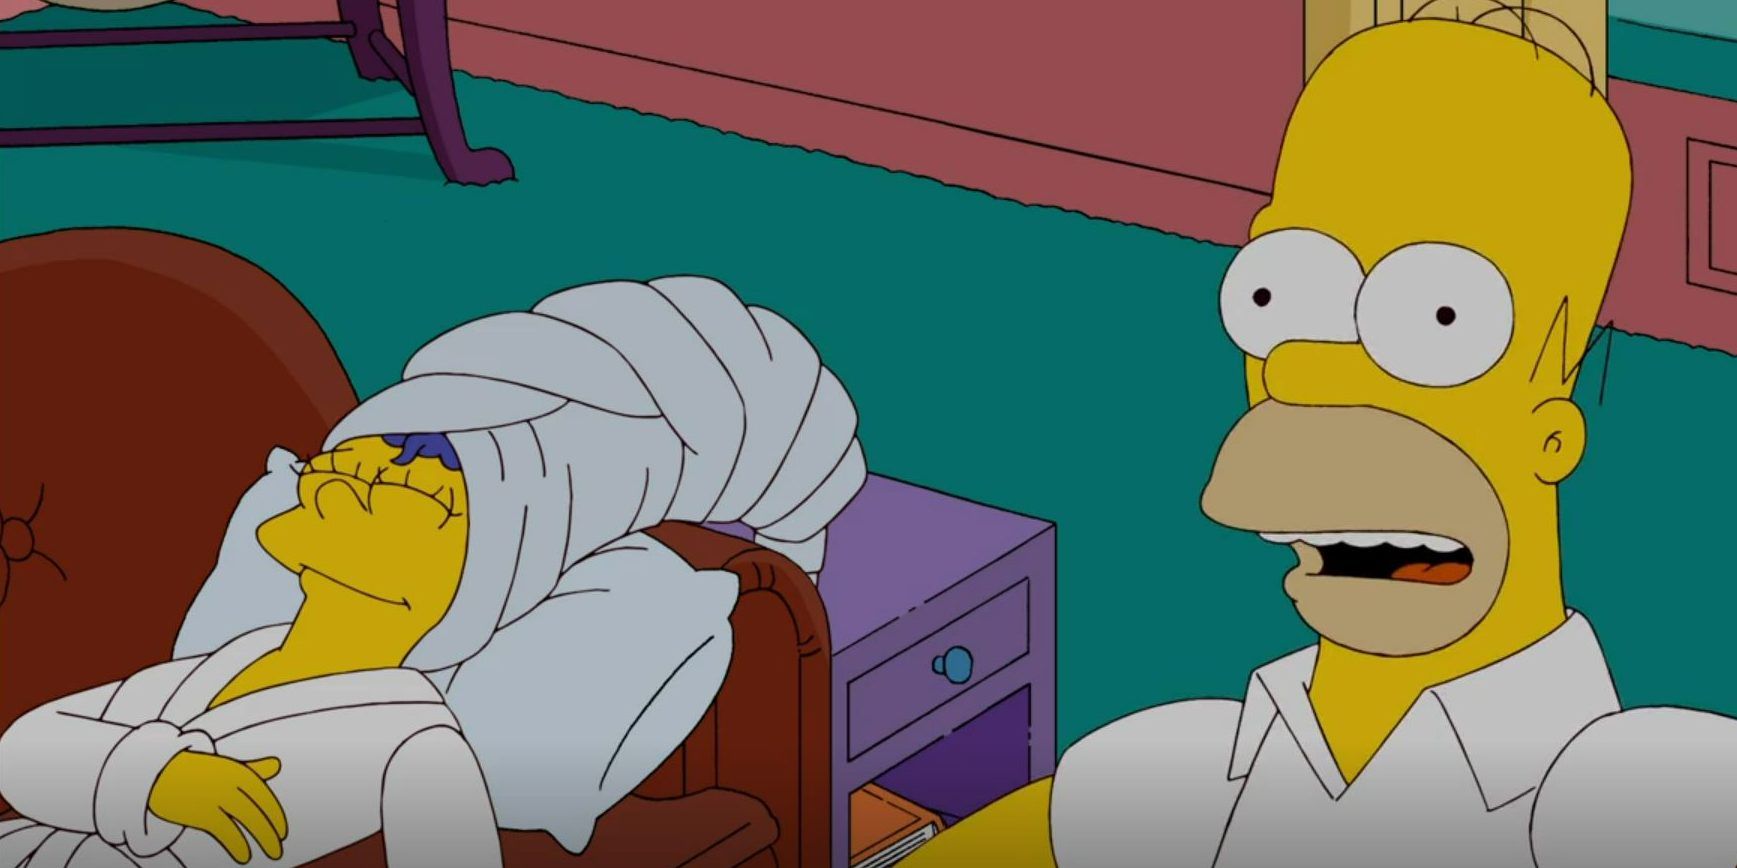 Homer seeing Marge with her hair in a towel in The Simpsons.